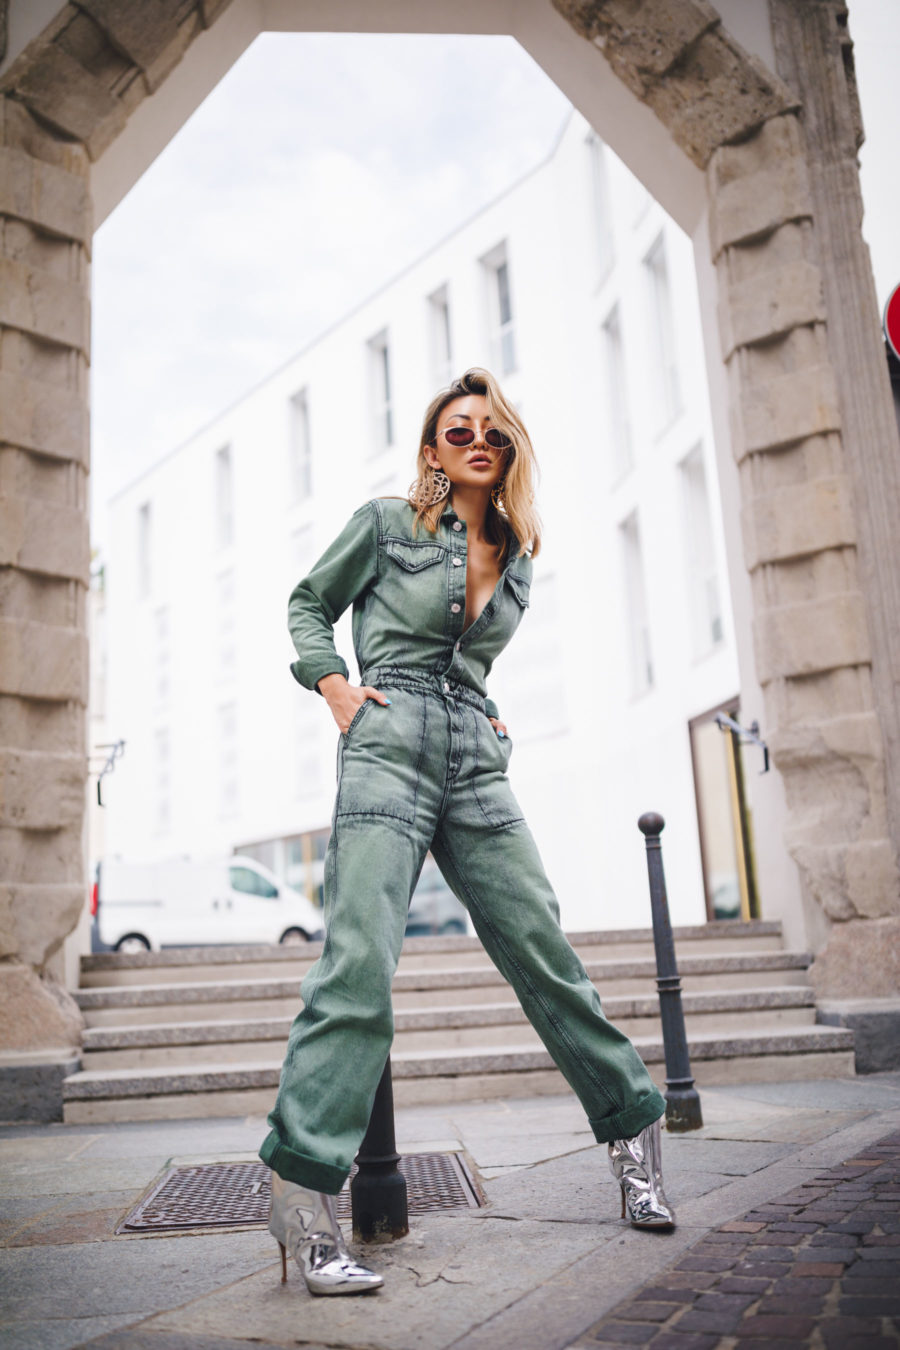 jessica wang shares ways to achieve your goals in 2019, fashion blogger jessica wang wearing denim boiler suit with metallic boots during MFW // Notjessfashion.com